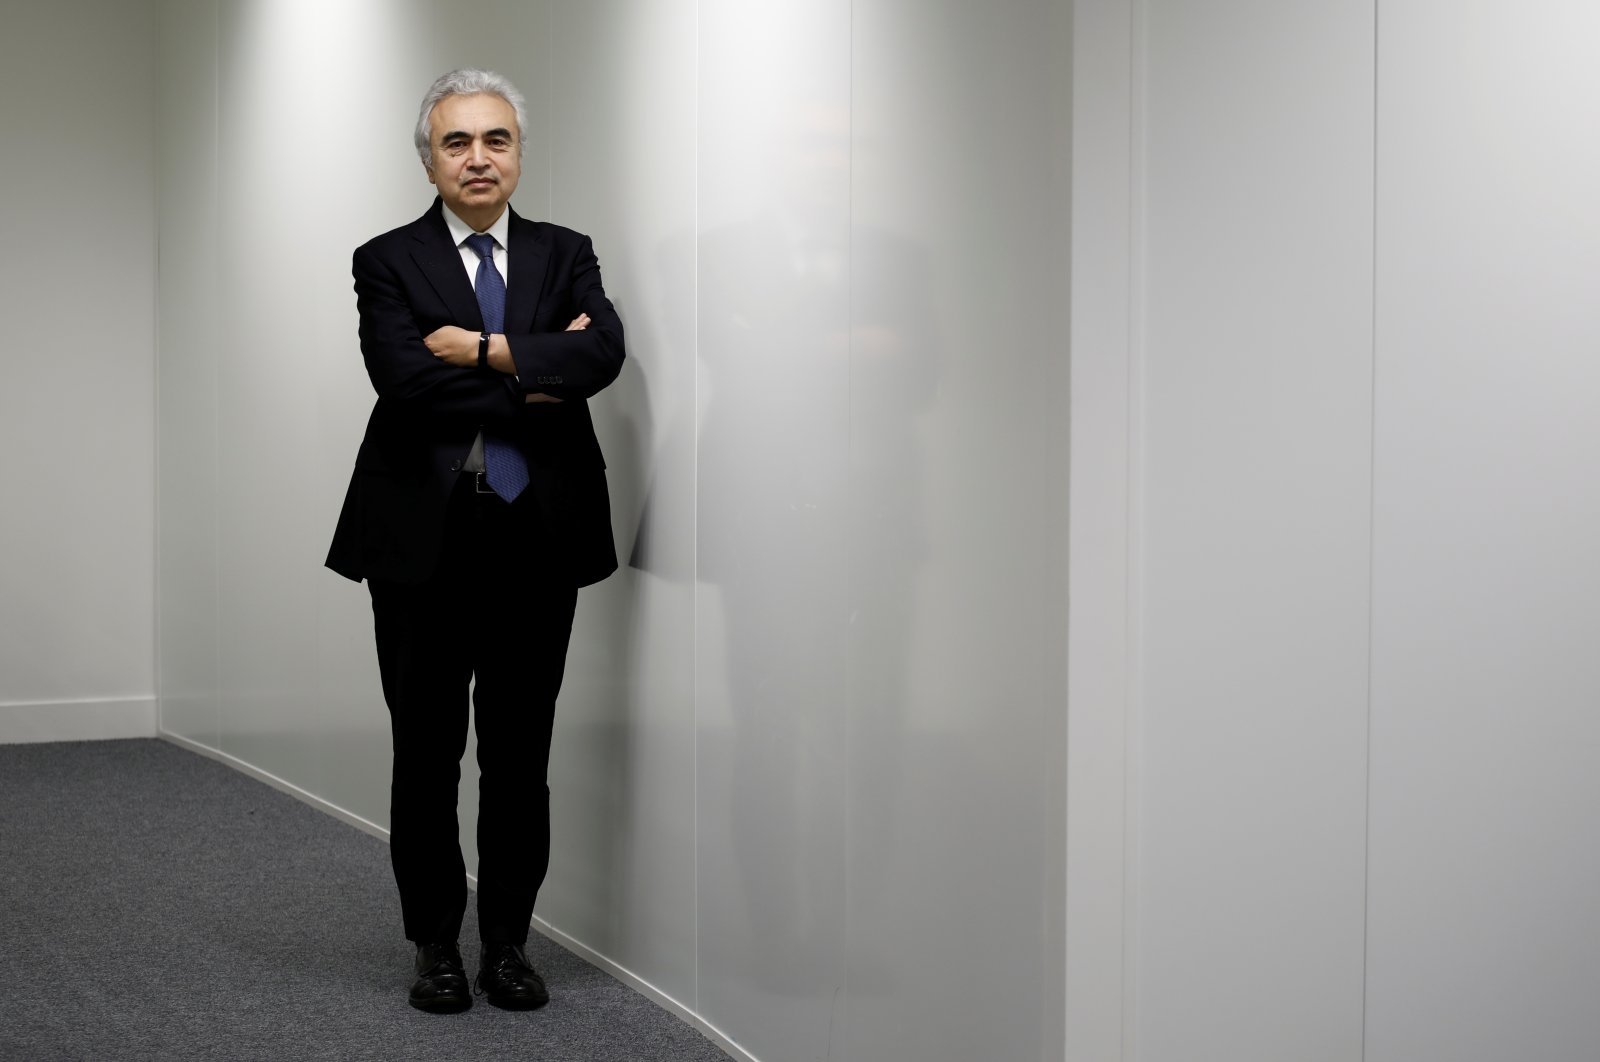 Fatih Birol, executive director of the International Energy Agency (IEA), poses for a portrait at their offices in Paris, France, Nov. 7, 2019. (Reuters Photo)